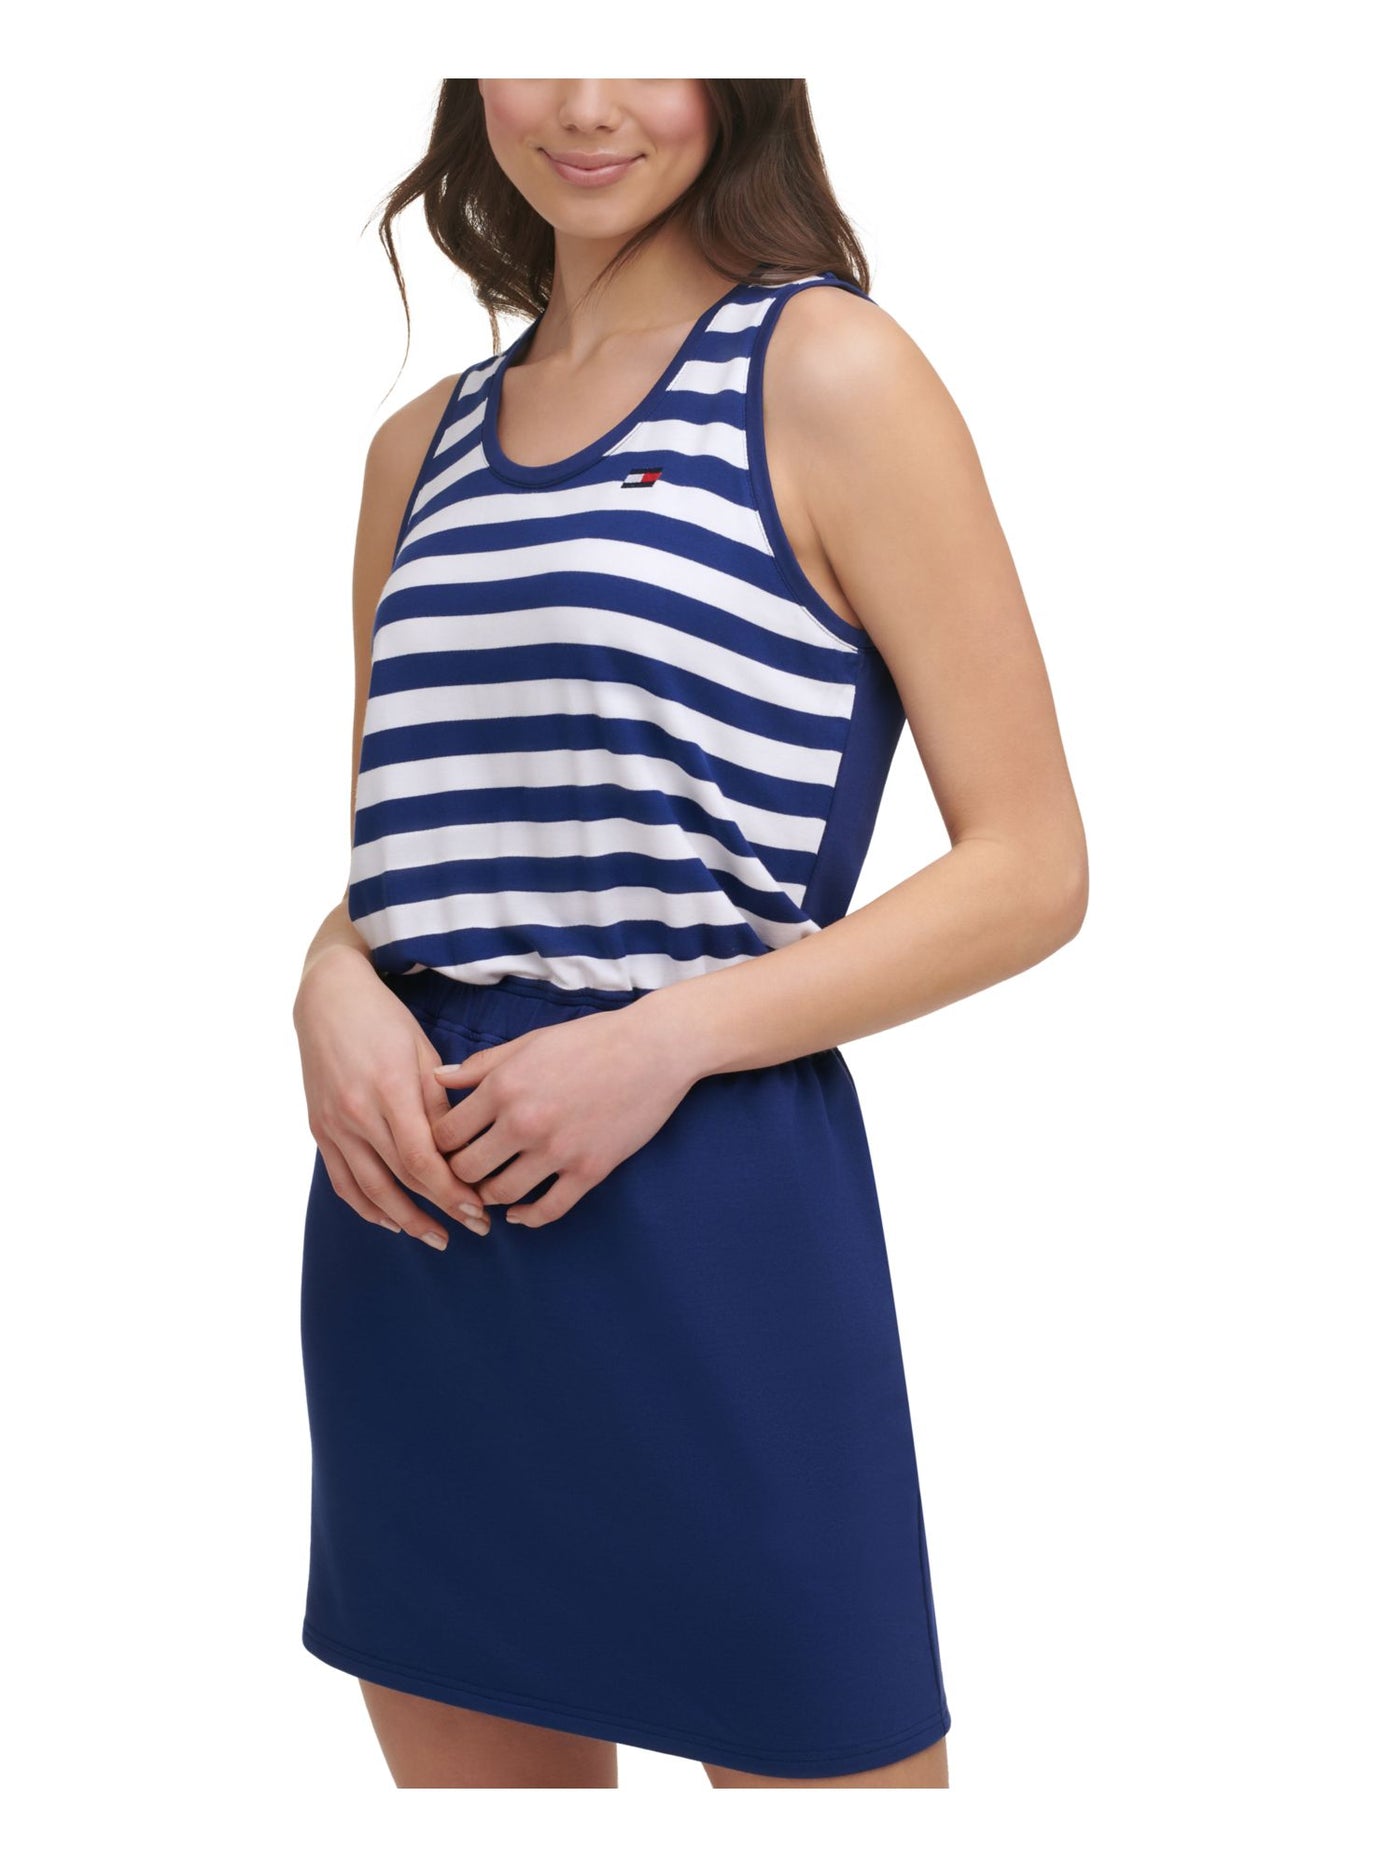 TOMMY HILFIGER SPORT Womens Blue Stretch Embroidered Terry Cinched-waist Striped Sleeveless Scoop Neck Short Sheath Dress XXL